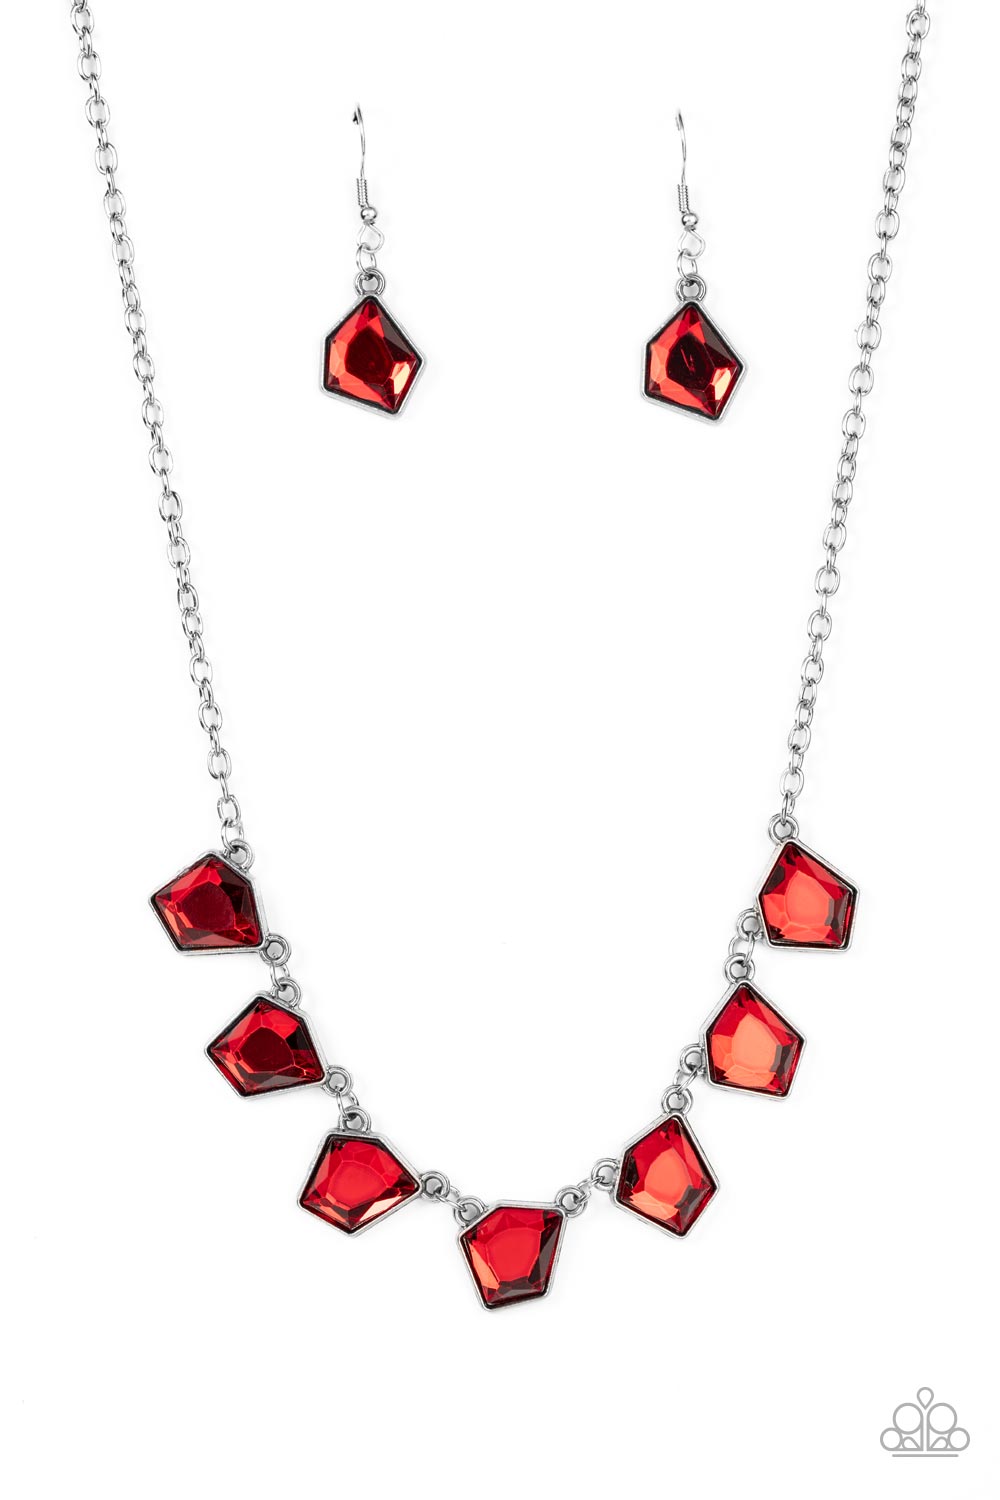 Necklace - Experimental Edge - Red